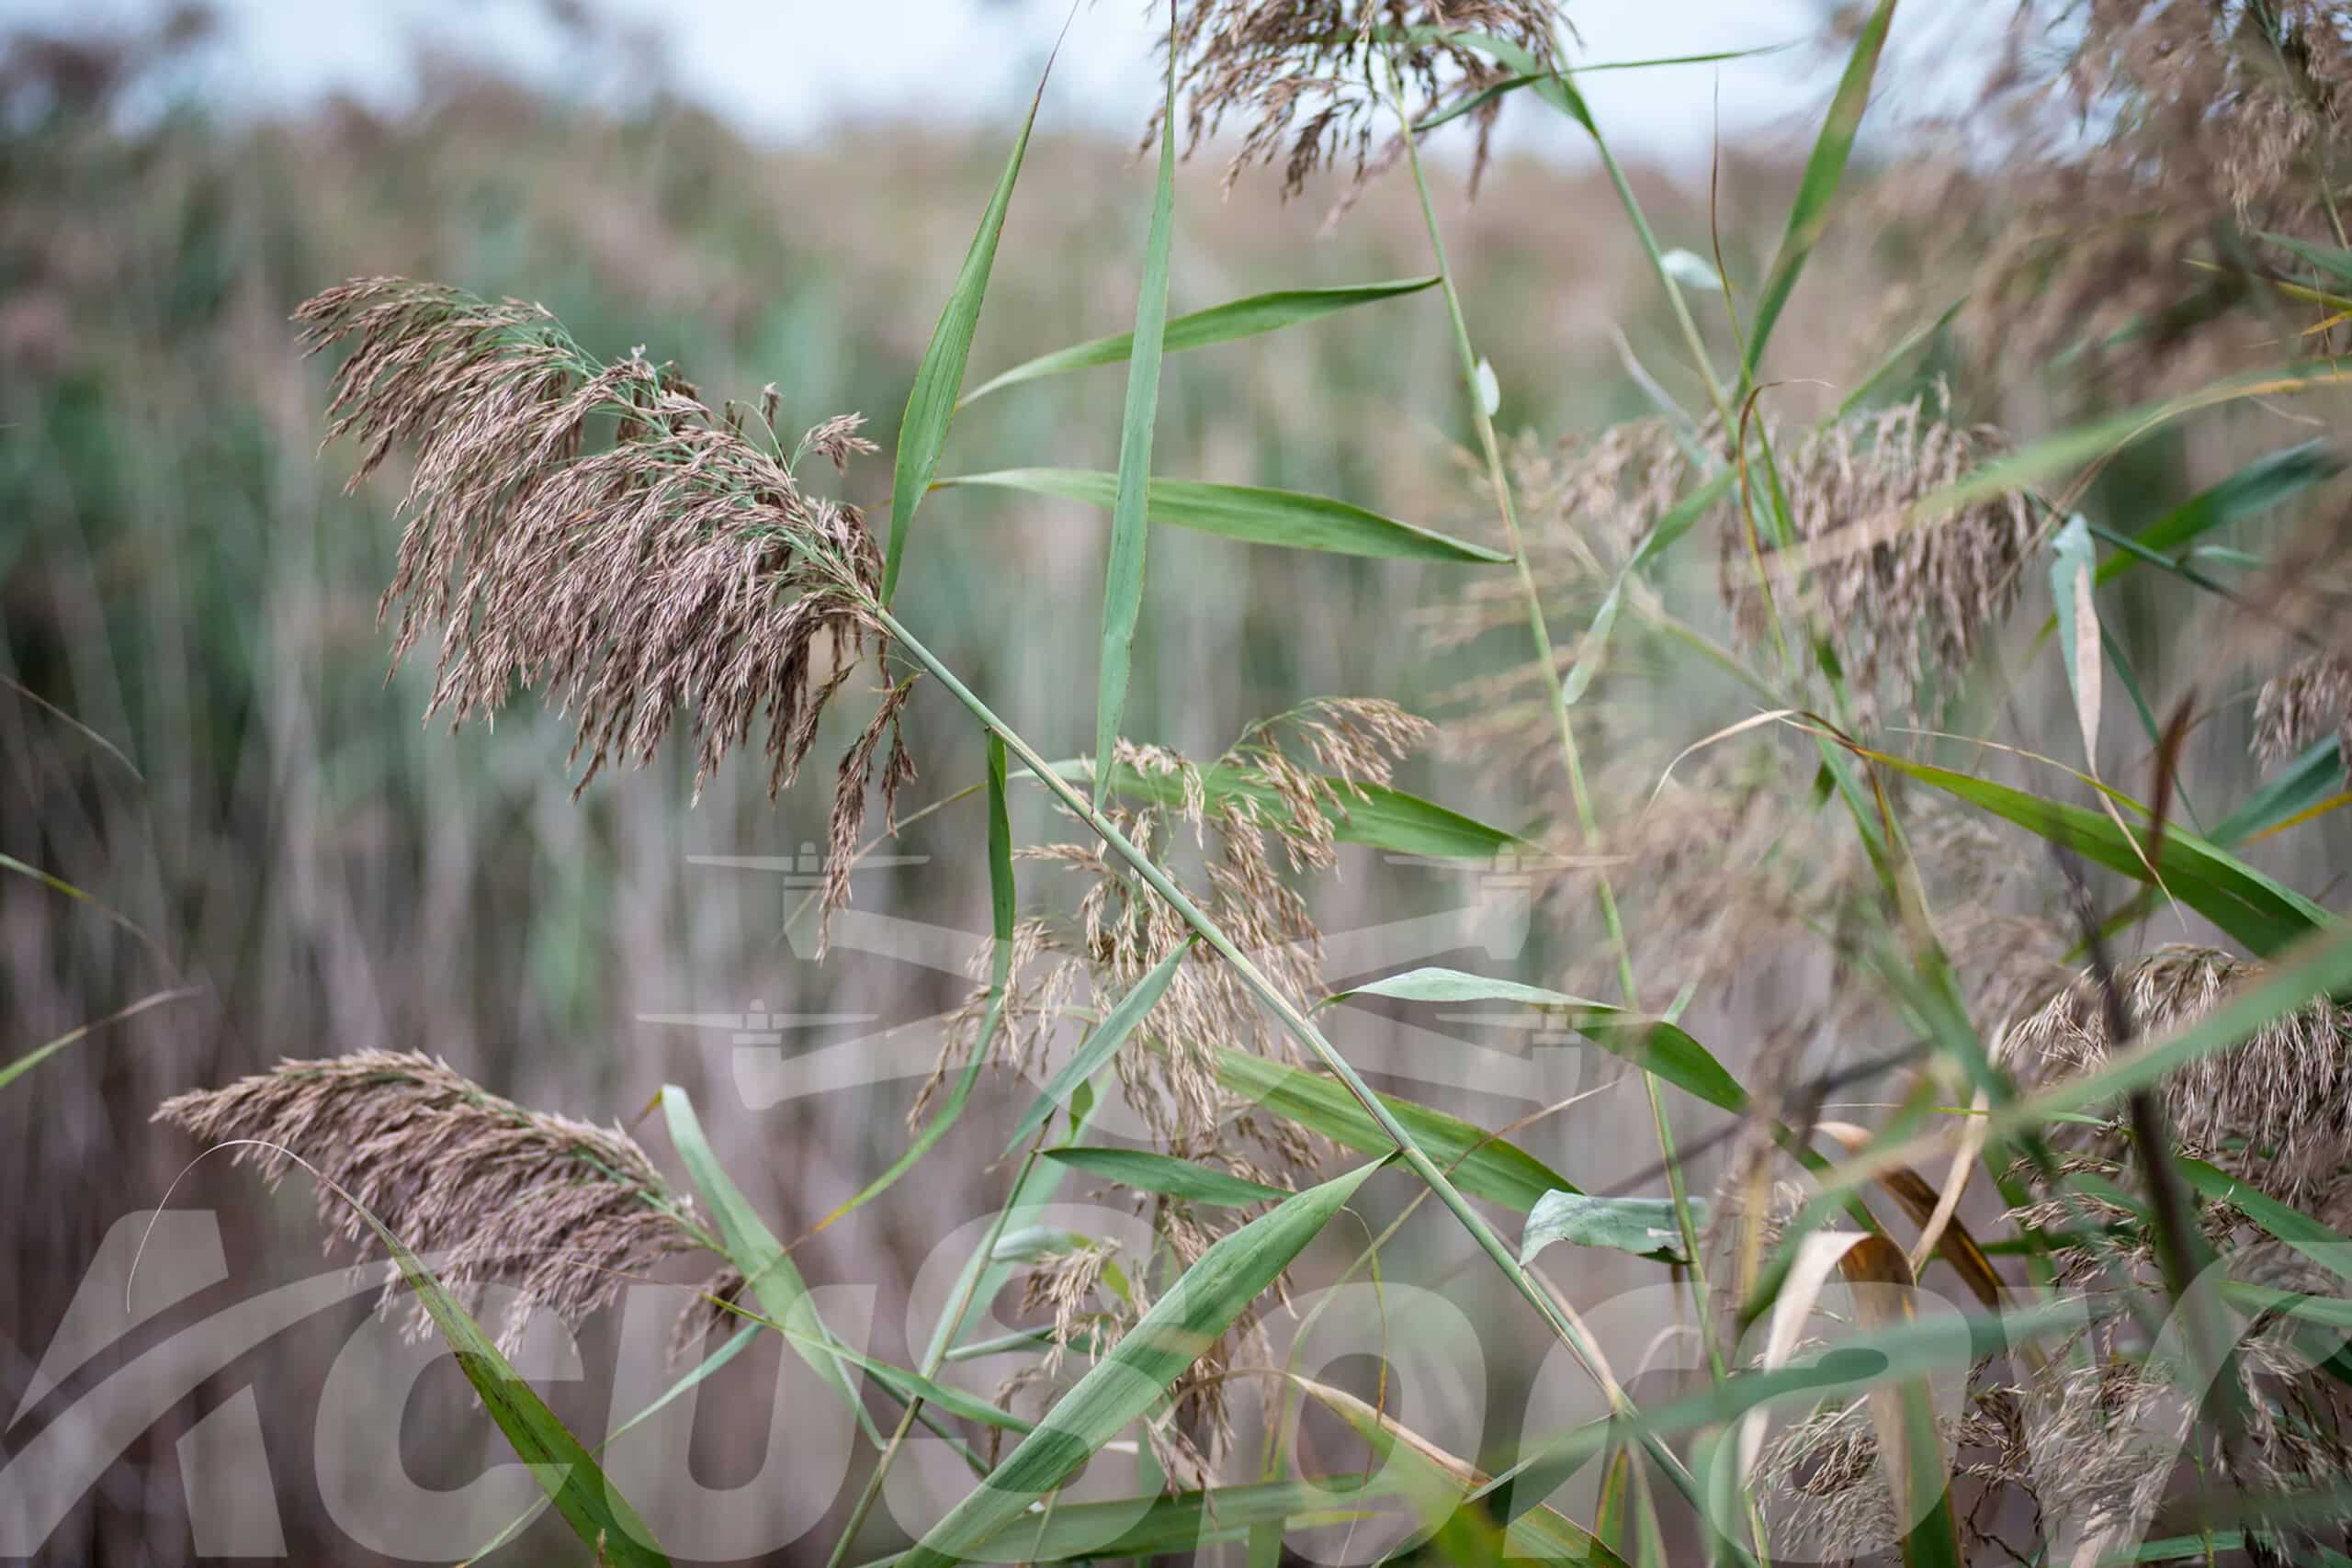 Close-up image of Phragmites, an invasive species highlighting the need for drone technology in invasive species management.